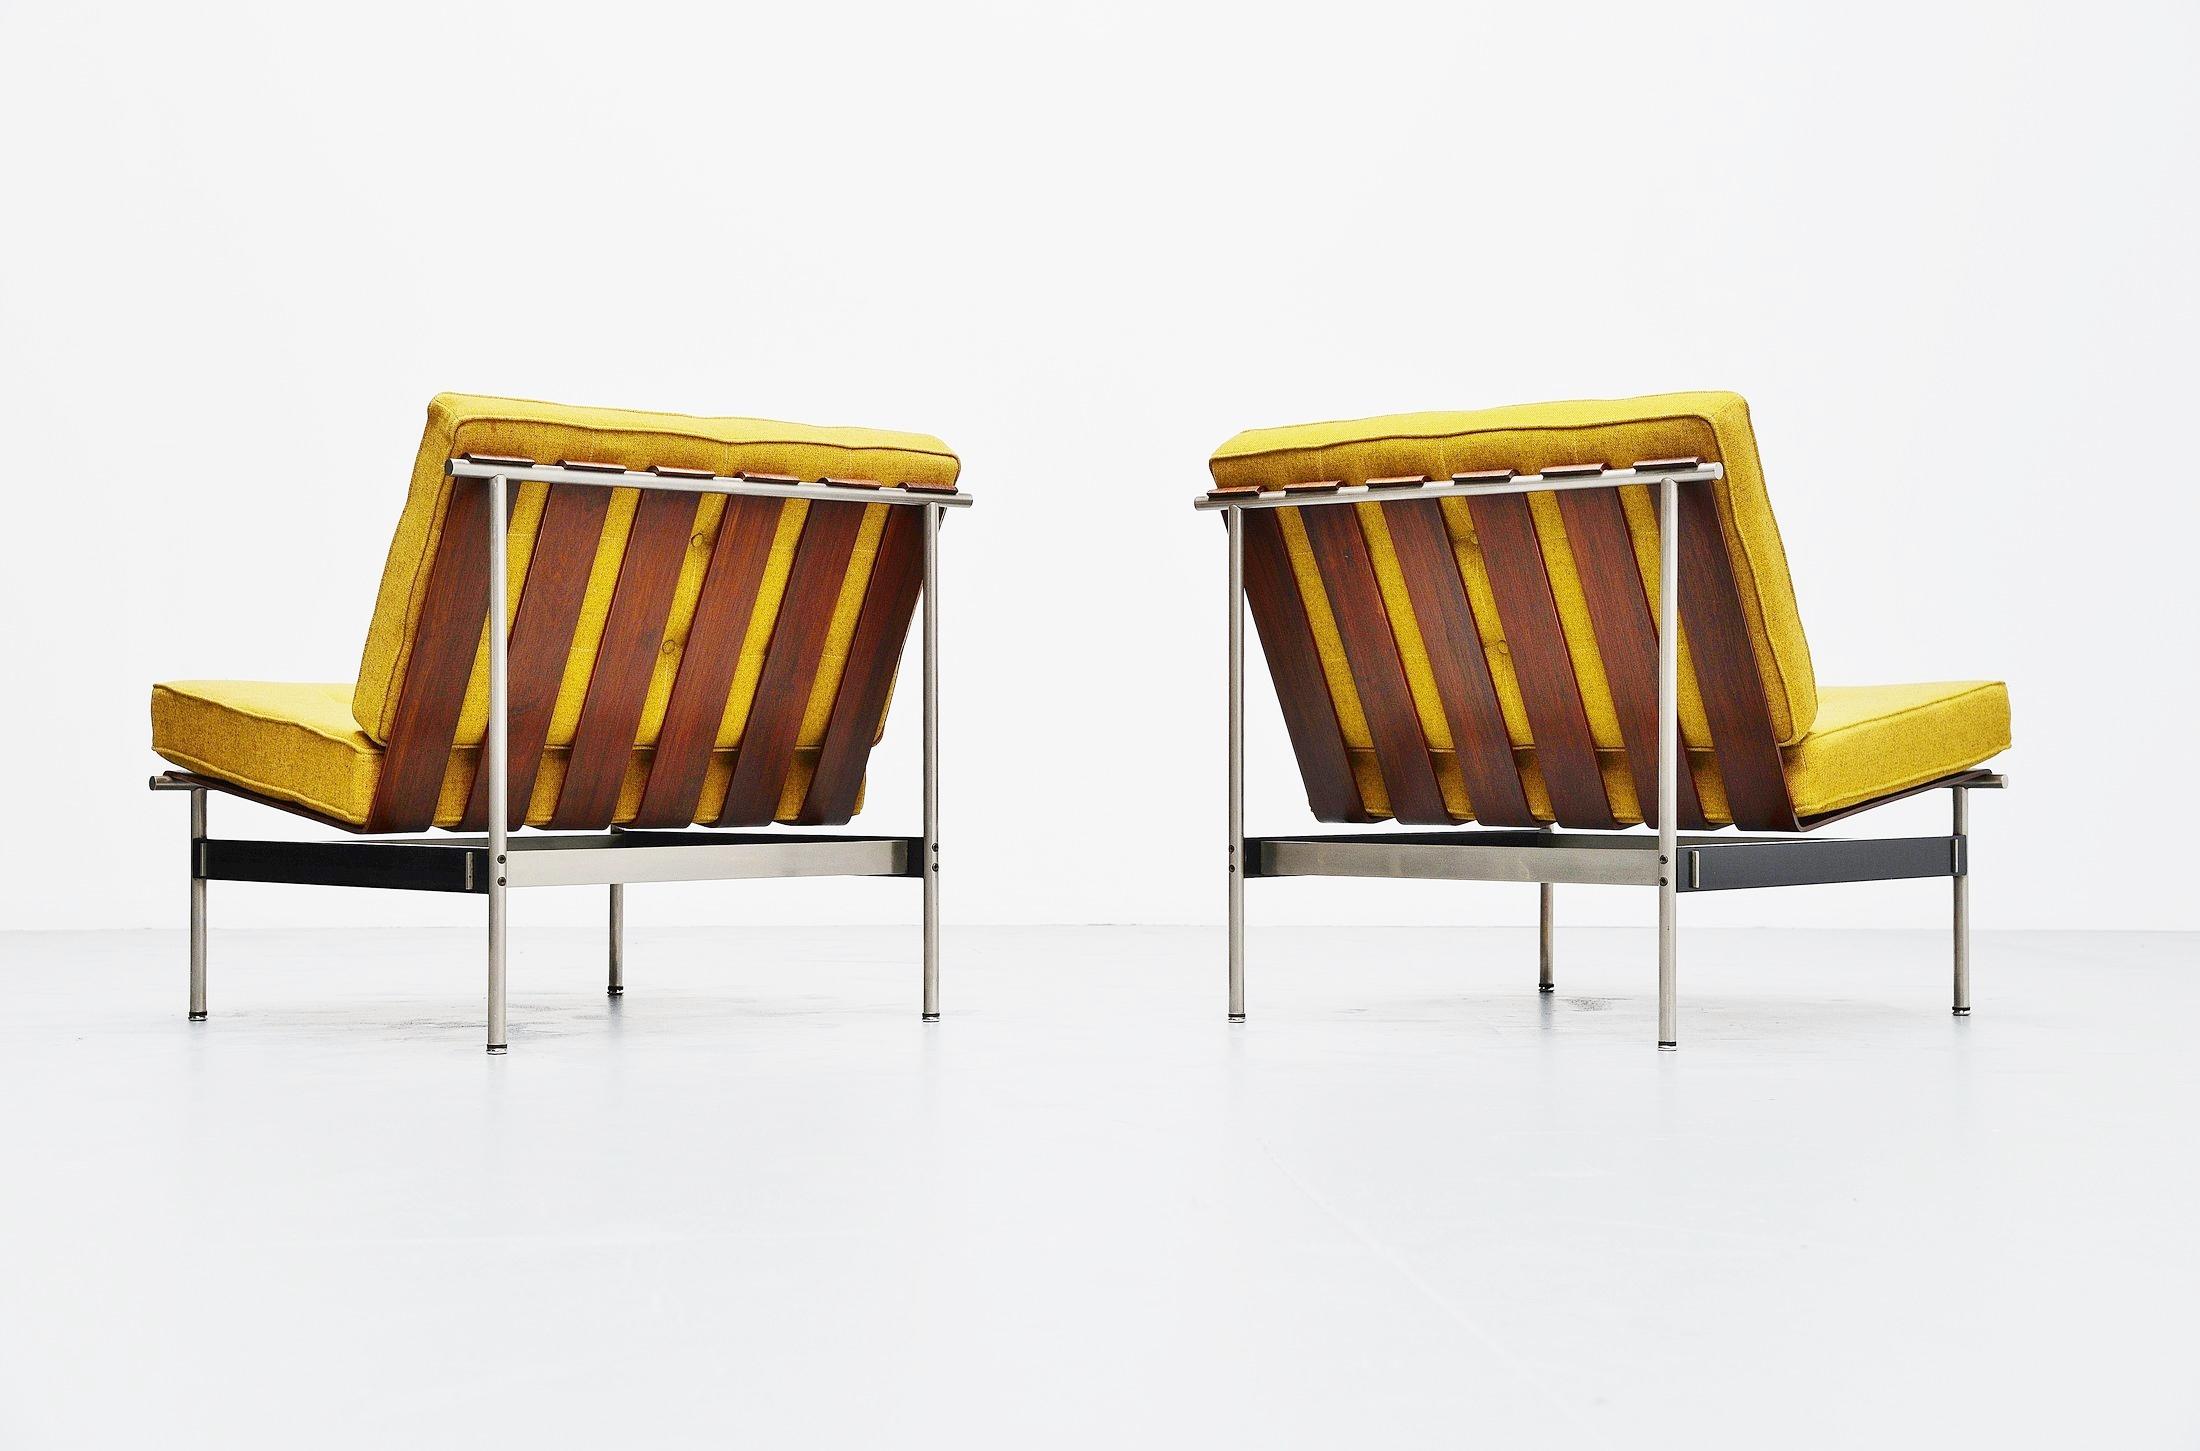 Highly rare lounge chairs model 416 designed by Dutch designer (With Chinese/Indonesian background) Kho Liang Ie and manufactured by Artifort, Holland 1959. This pair of chairs was one of the nicest designs by Kho Liang Ie for Artifort, and very